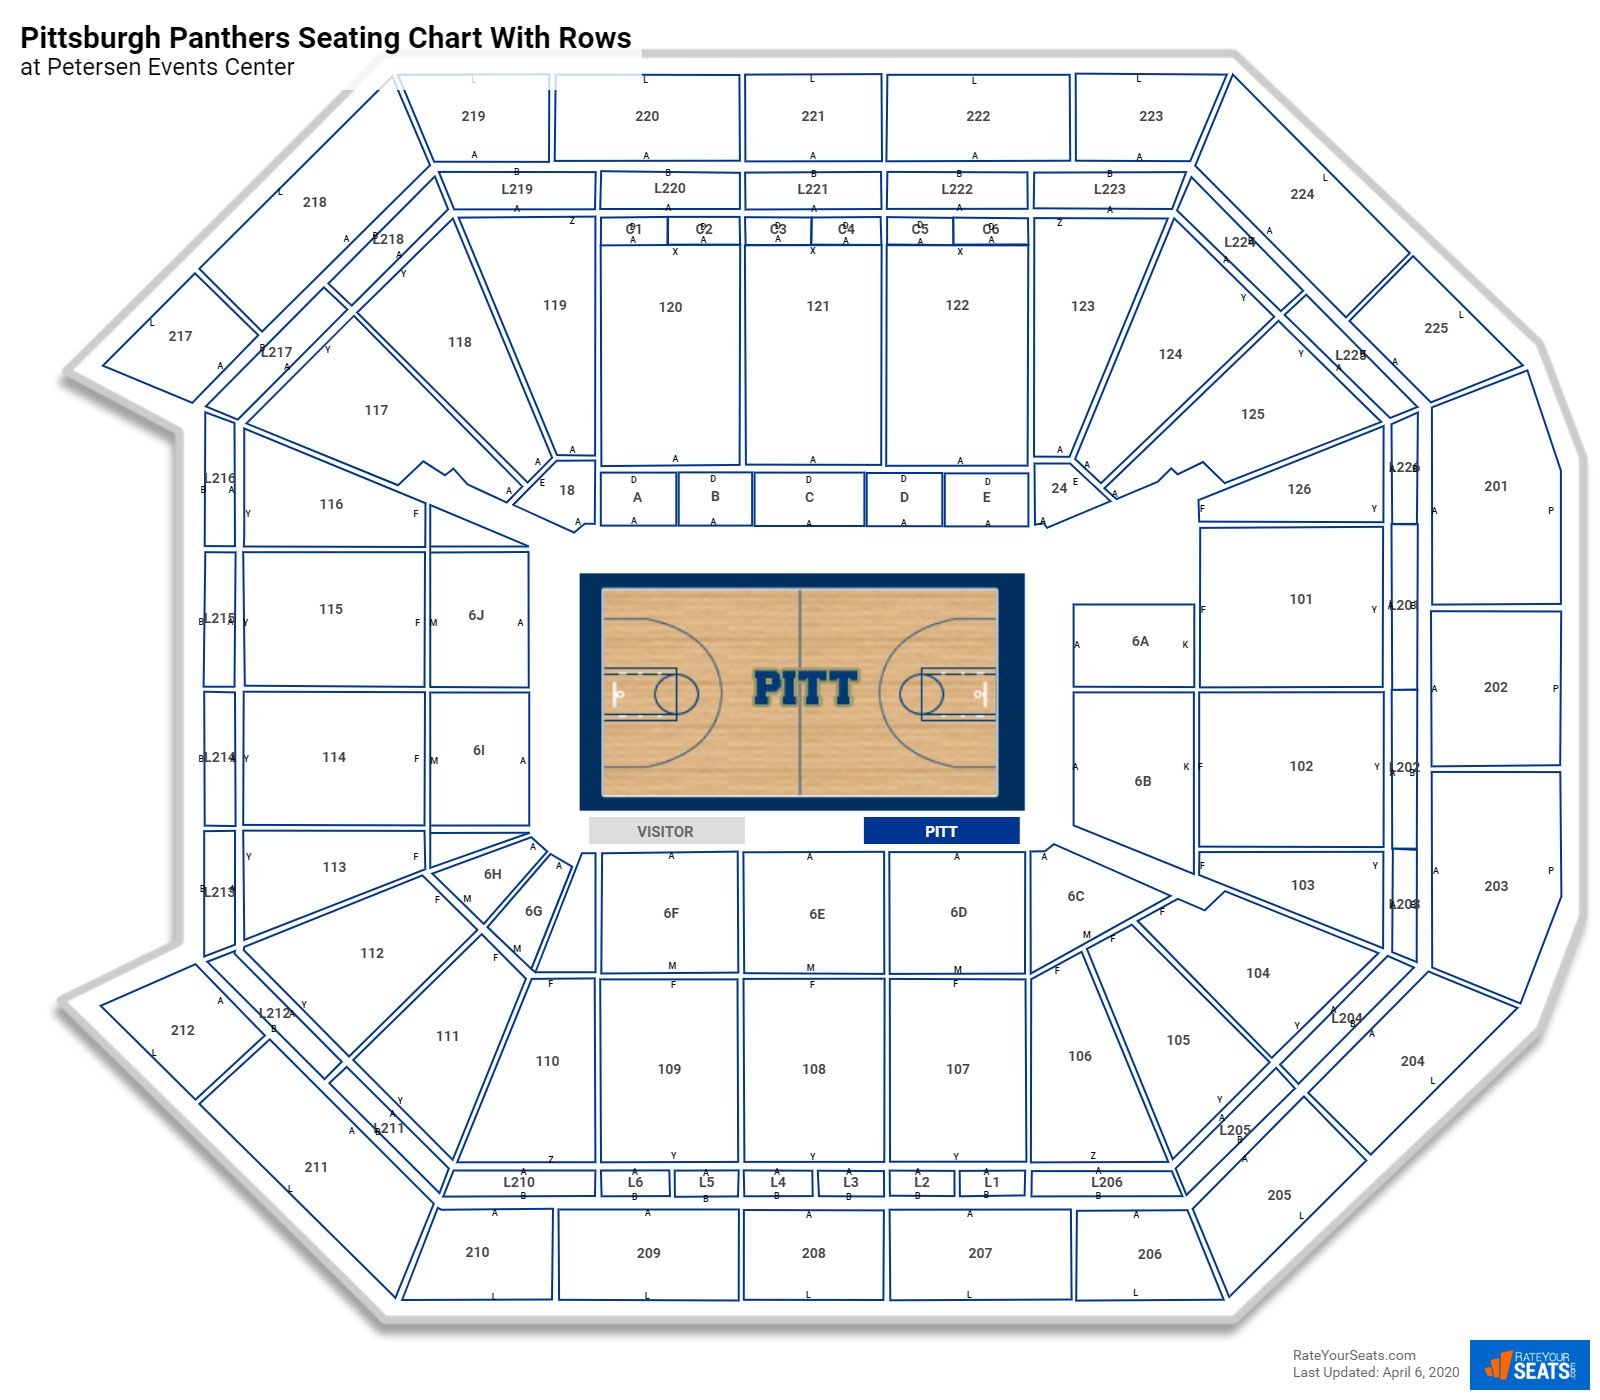 Petersen Events Center seating chart with row numbers